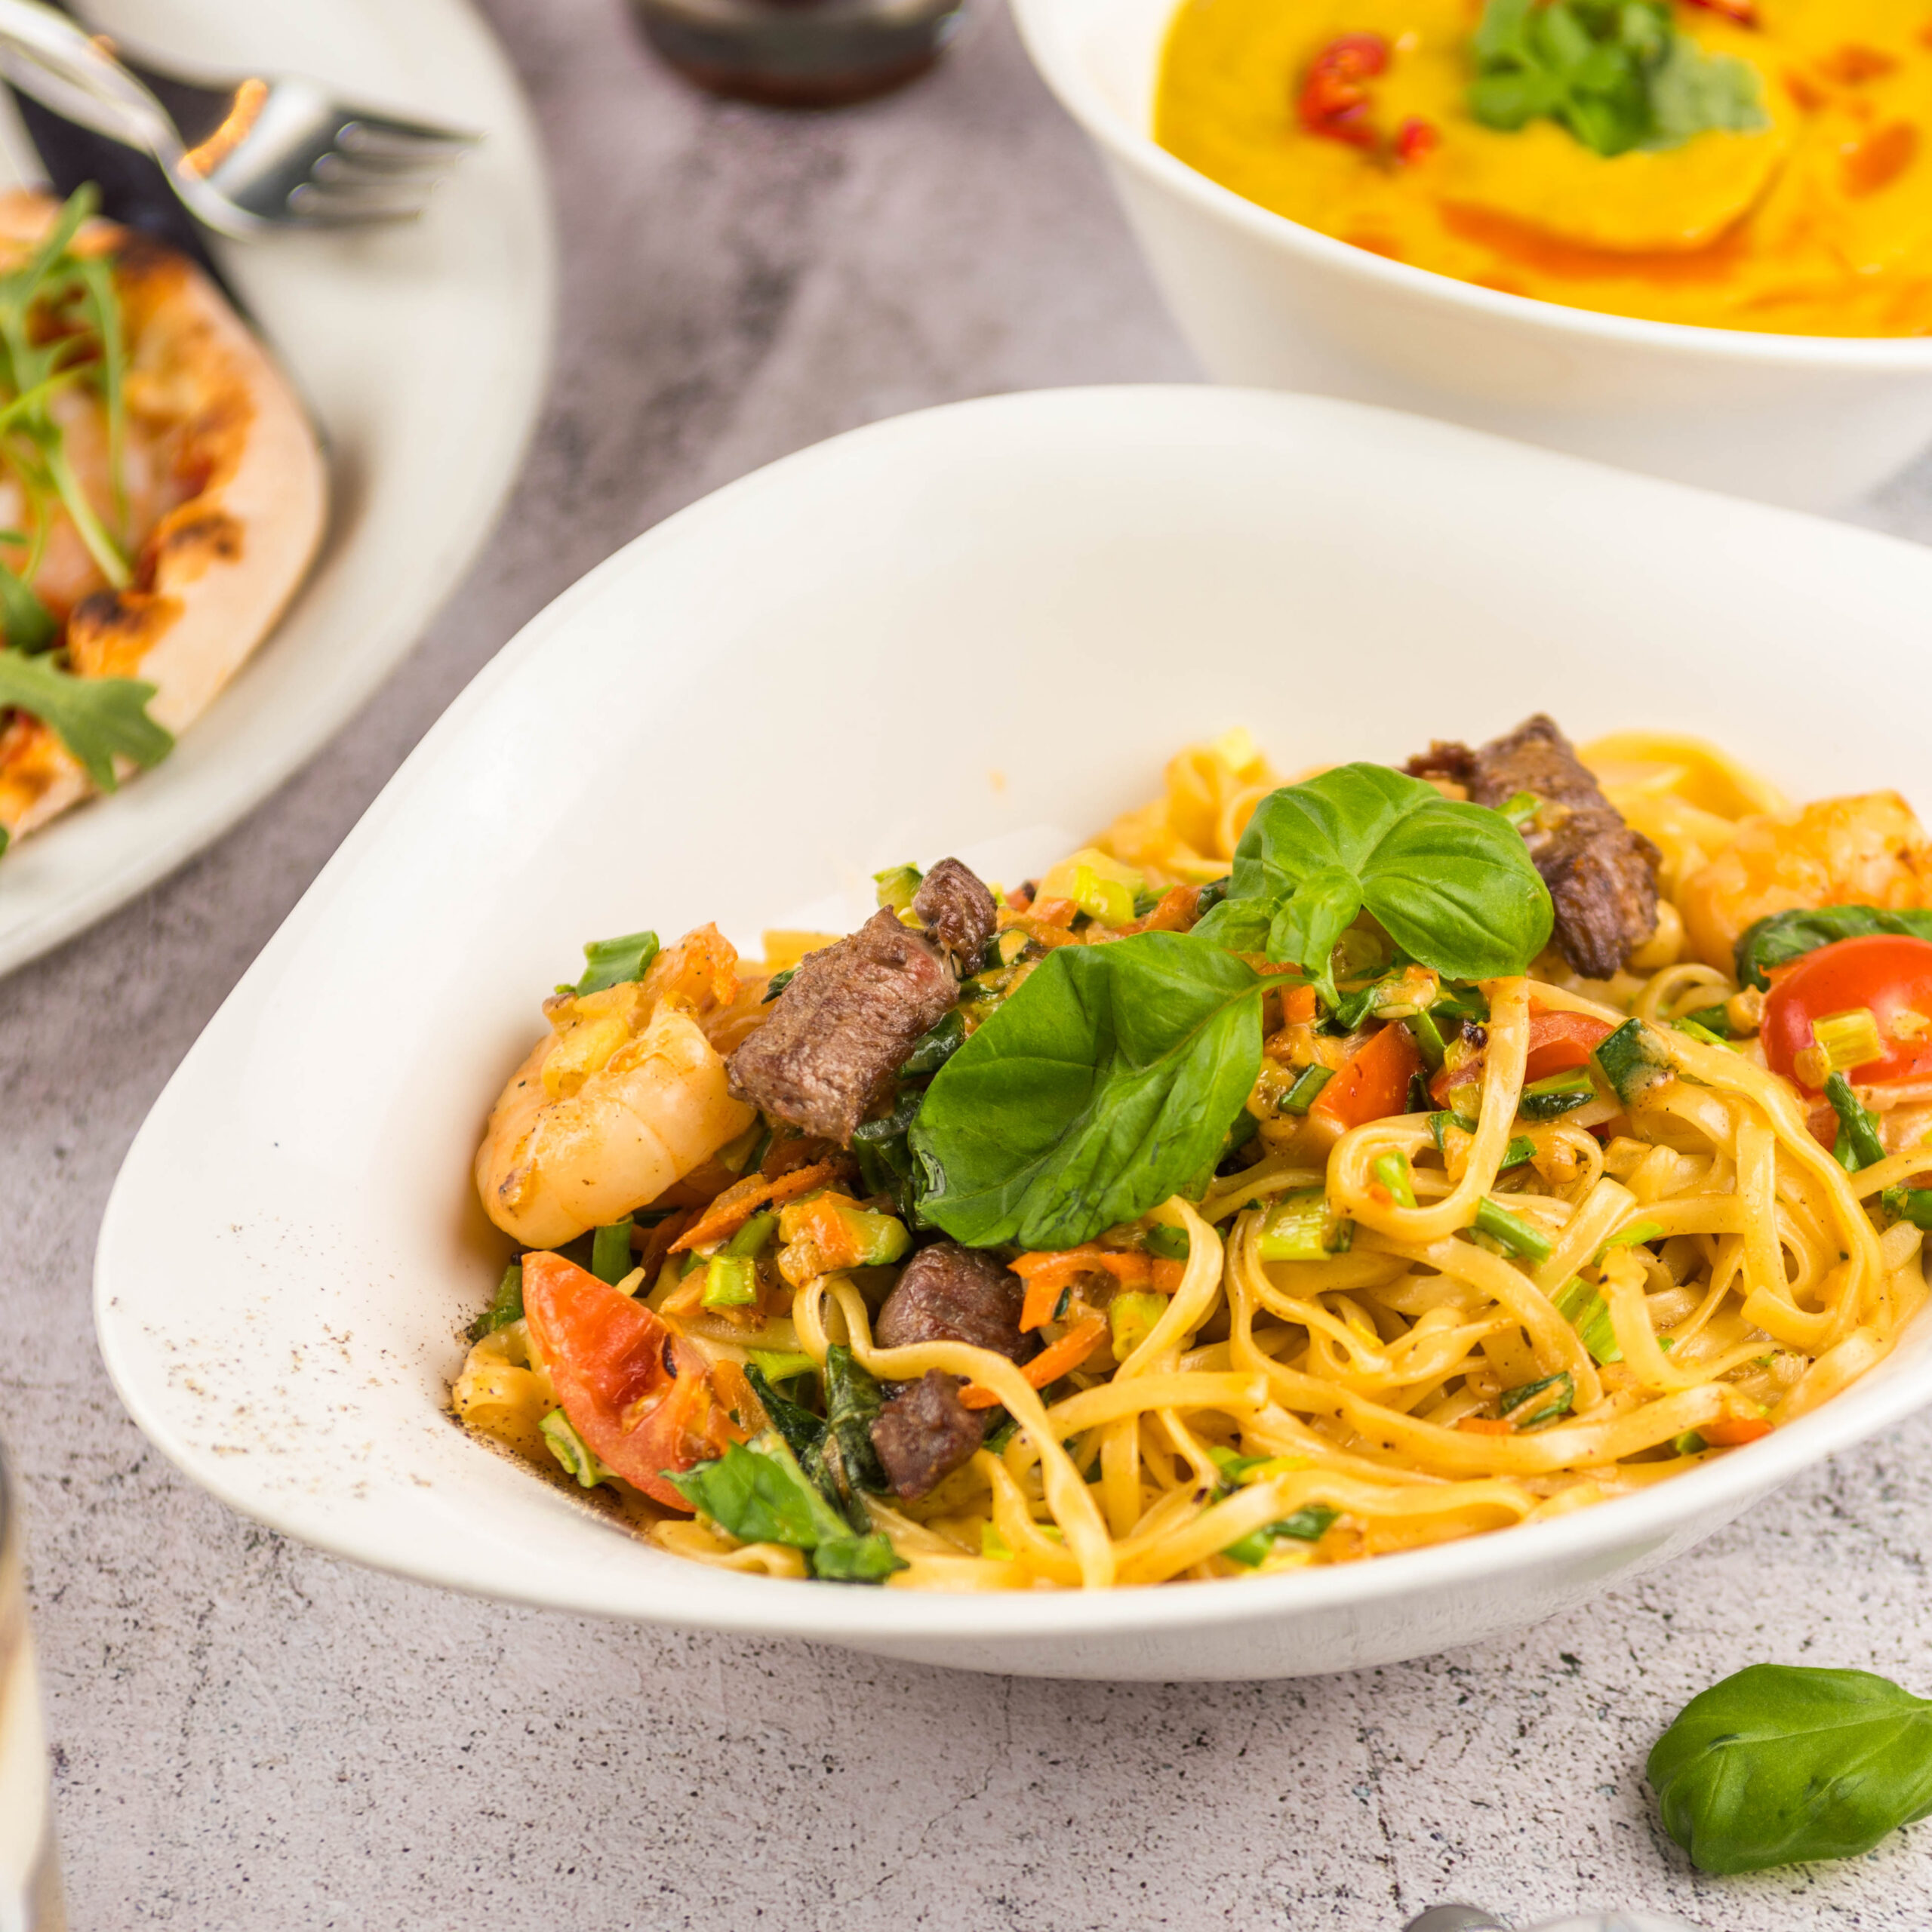 Special offers and discounts - Vapiano